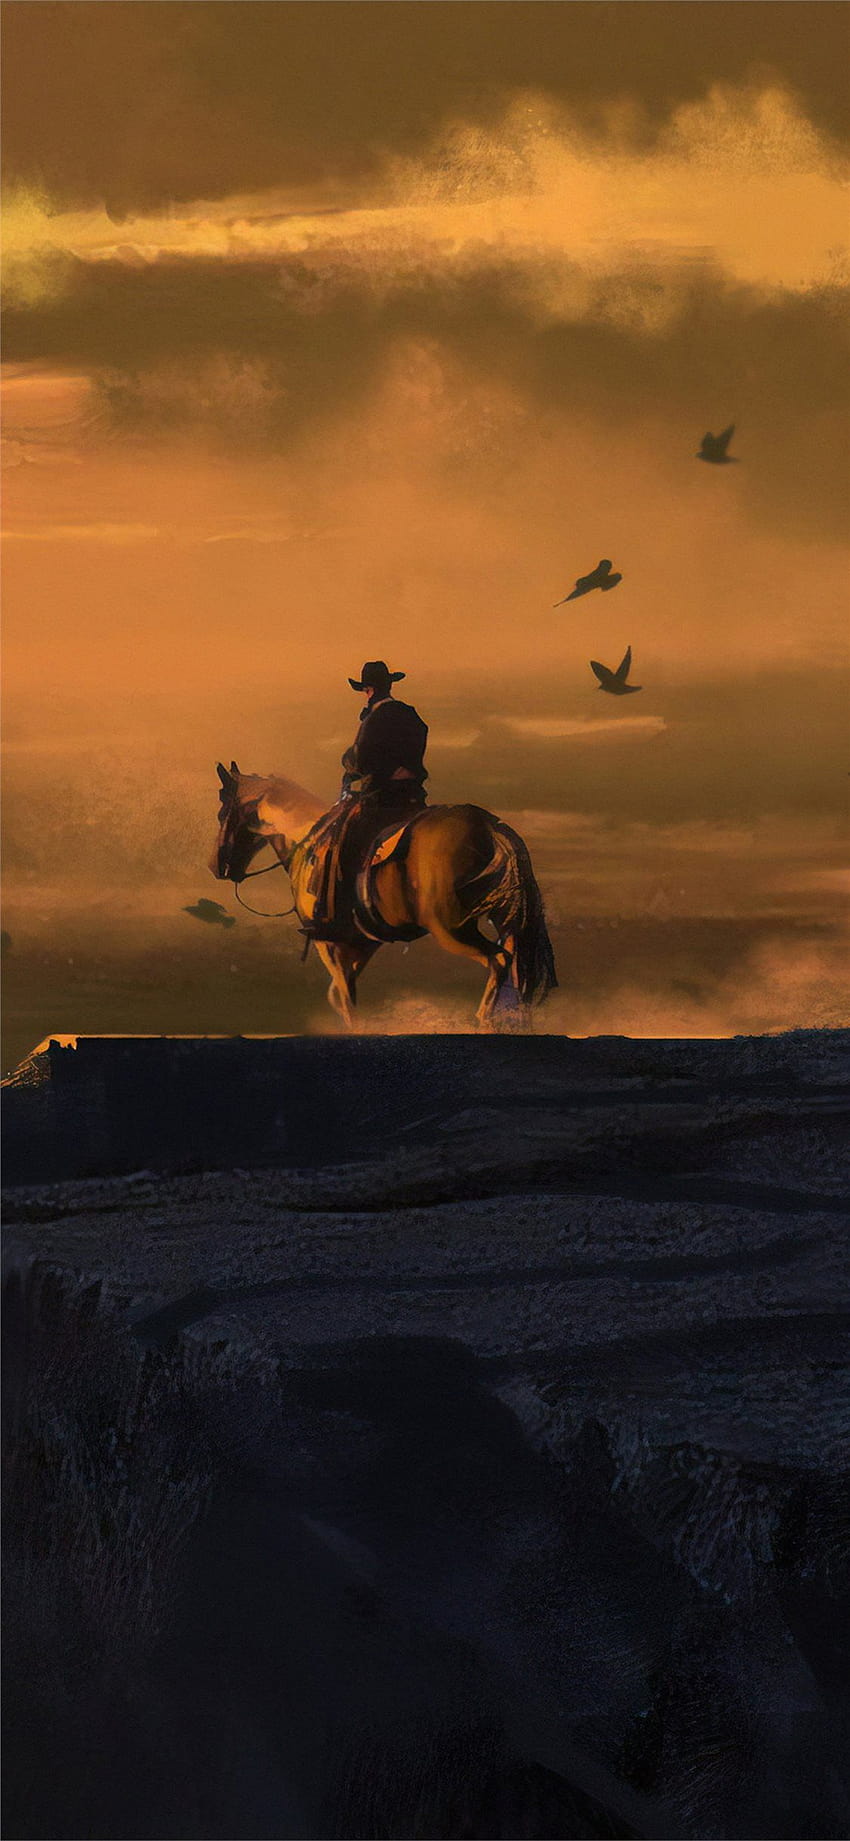 red dead redemption landhscape iPhone X, rdr2 iphone HD phone wallpaper